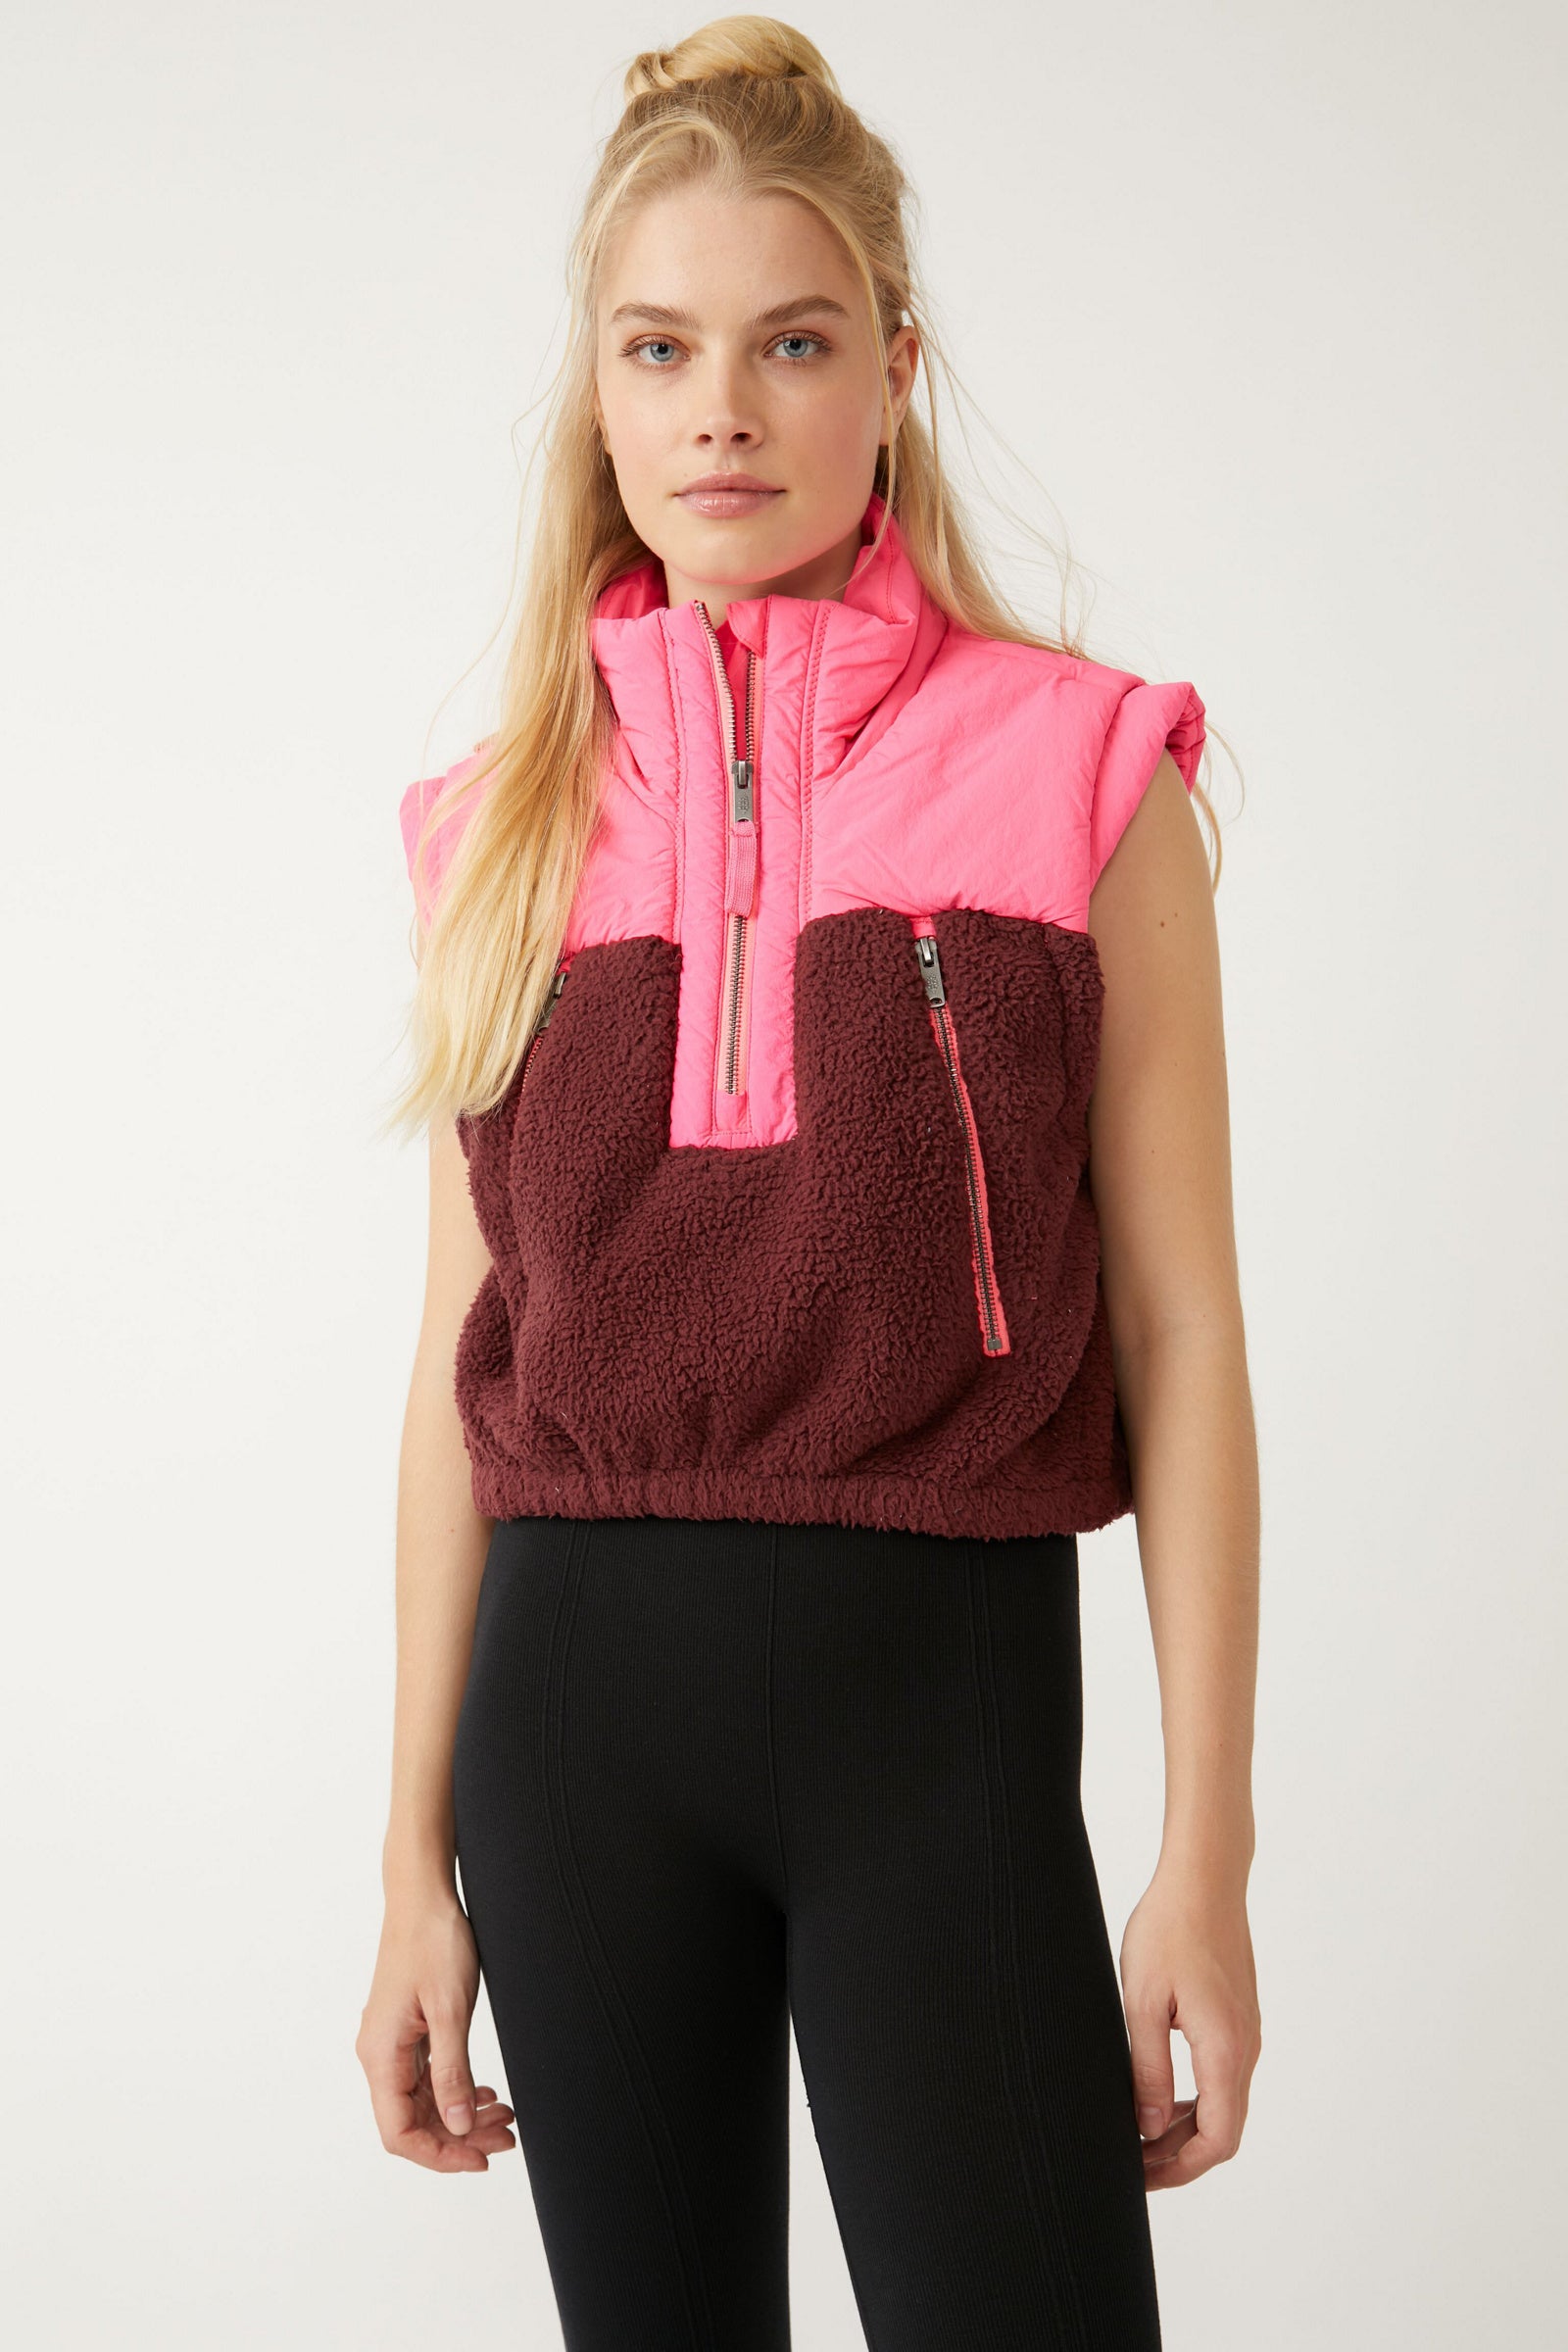 FREE PEOPLE JOURNEY AHEAD VEST IN POMEGRANATE COMBO